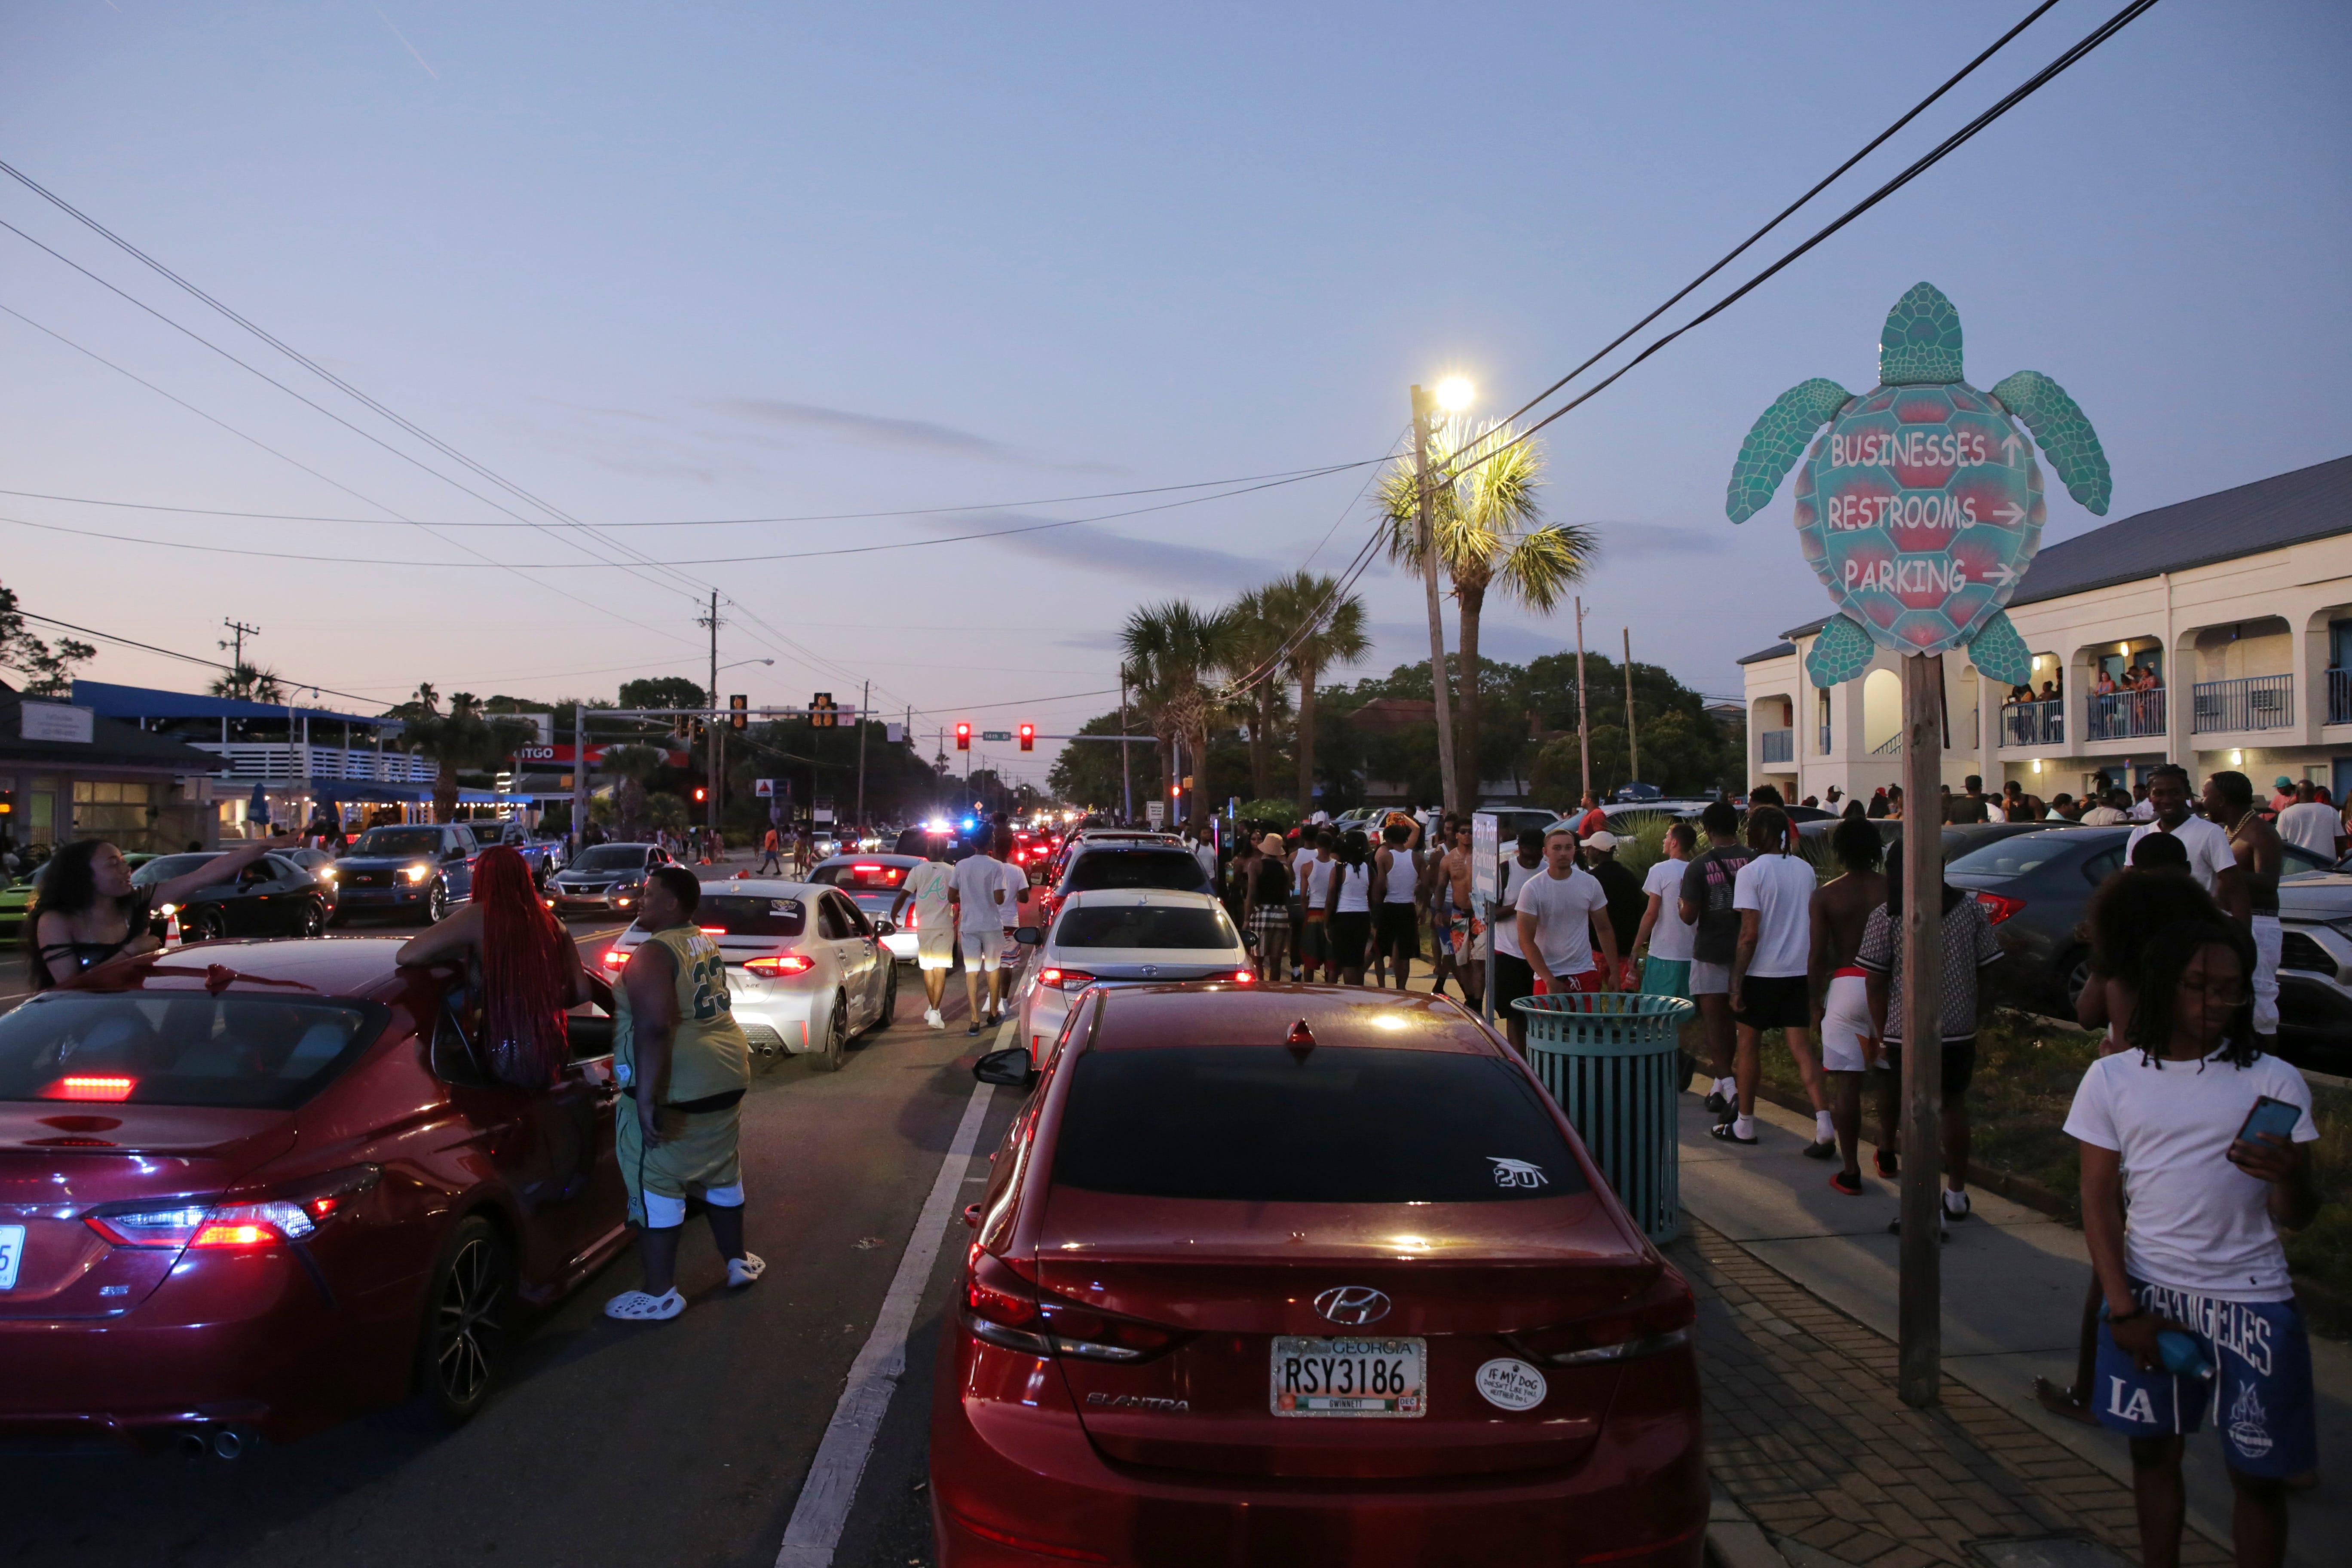 Party-goers hang out in the street during stand-still traffic caused by a past Orange Crush.